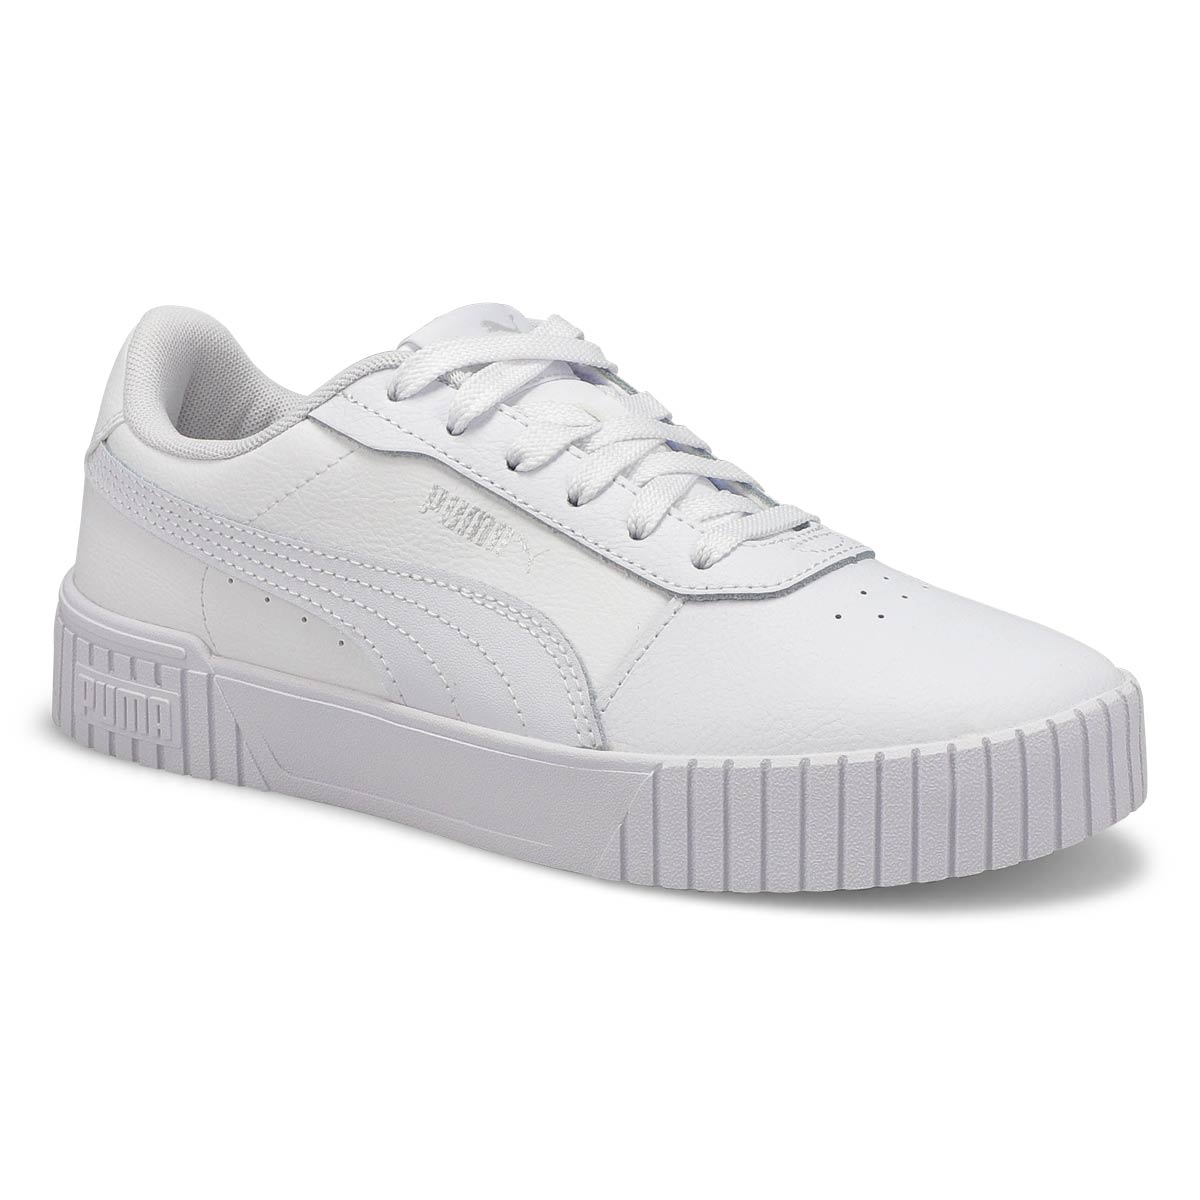 Women's Carina 2.0 Lace Up Sneaker- White